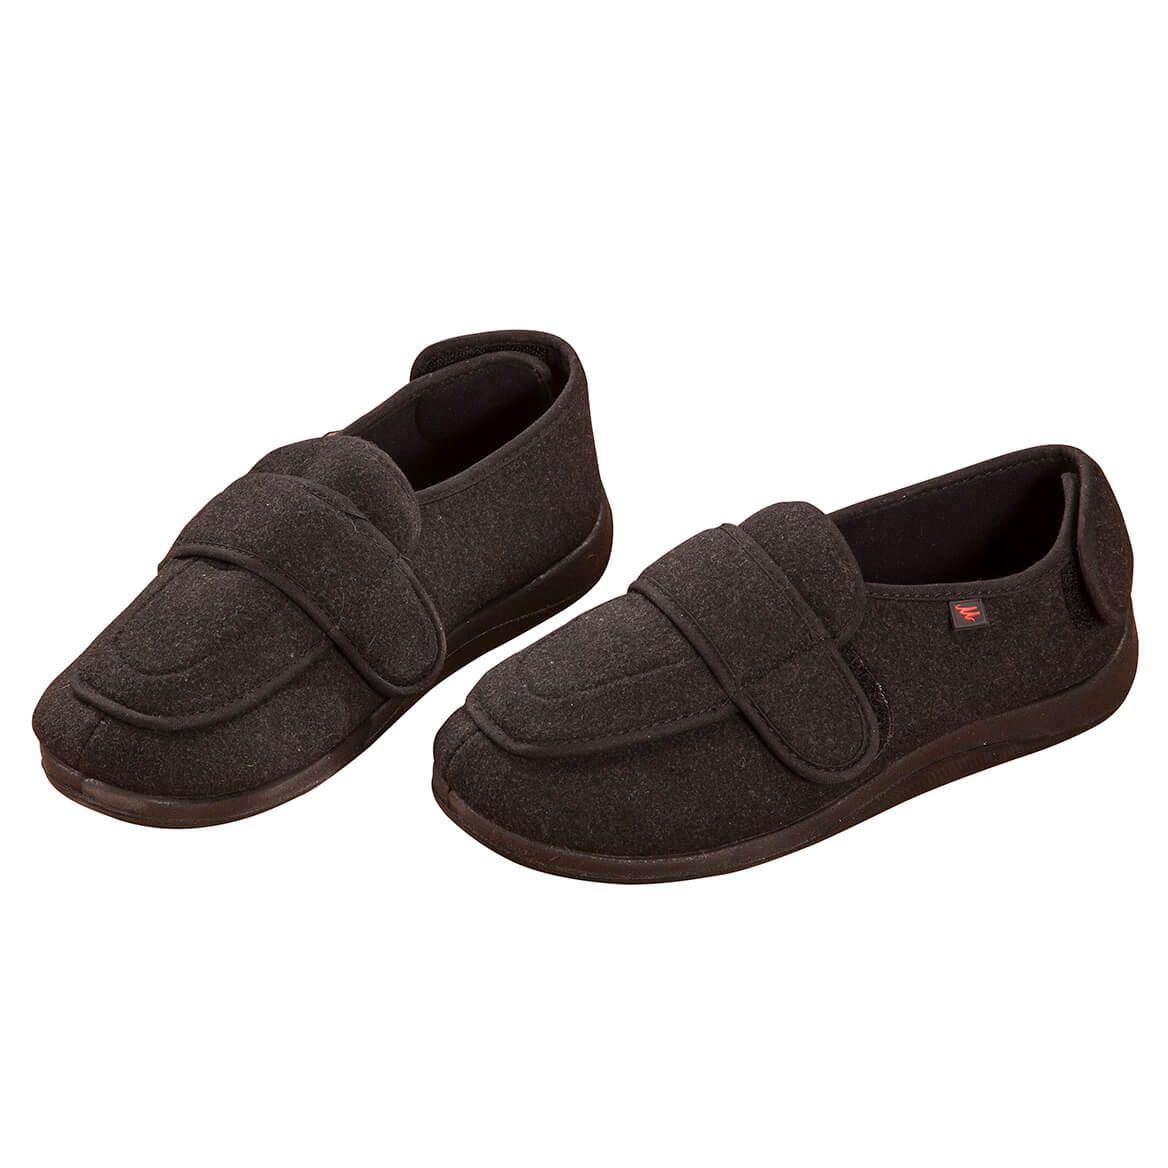 Adjustable Edema Slippers by Silver Steps™ + '-' + 367054